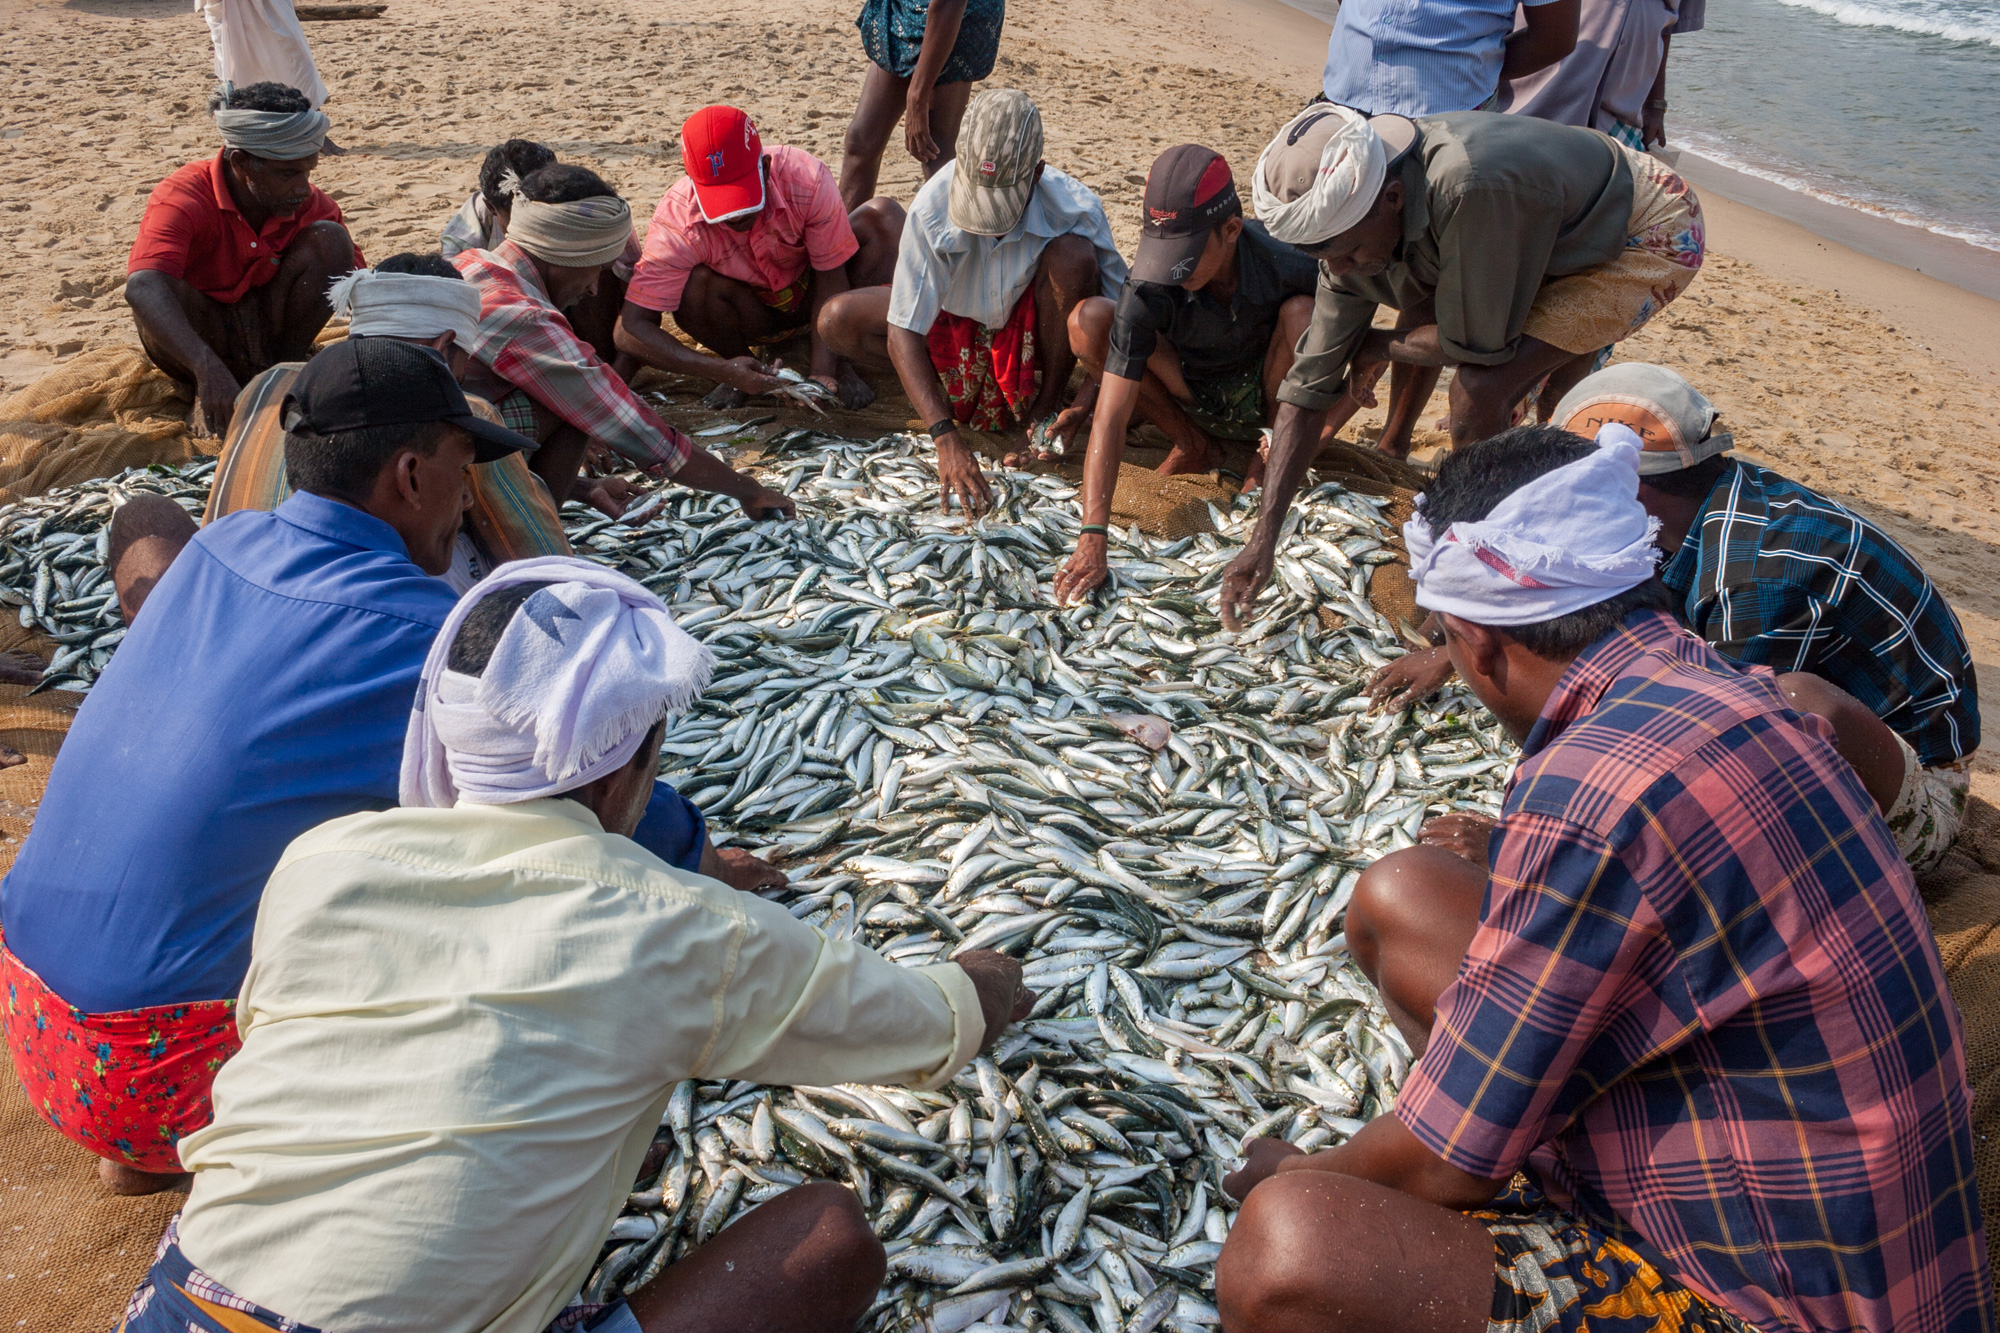 Fishermen in Kovalam, Kerala, sort through their catch. Kerala, a relatively prosperous state with a thriving fishing industry, drew Rs 11,108 lakh from in 2016-17, while Odisha drew Rs 27 lakh